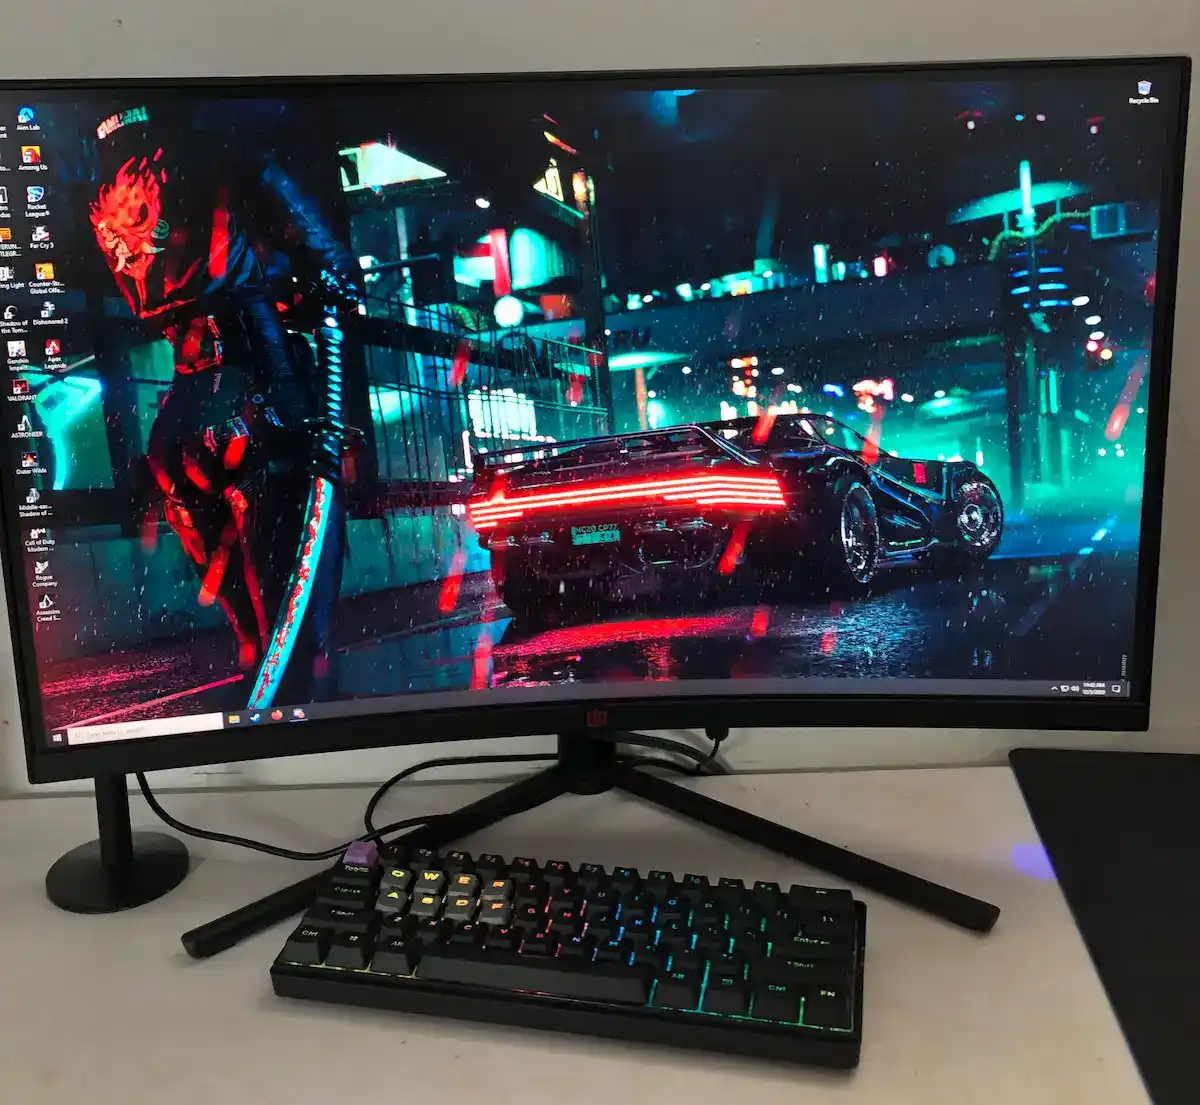 Deco Gear 27-Inch Curved Monitor Review